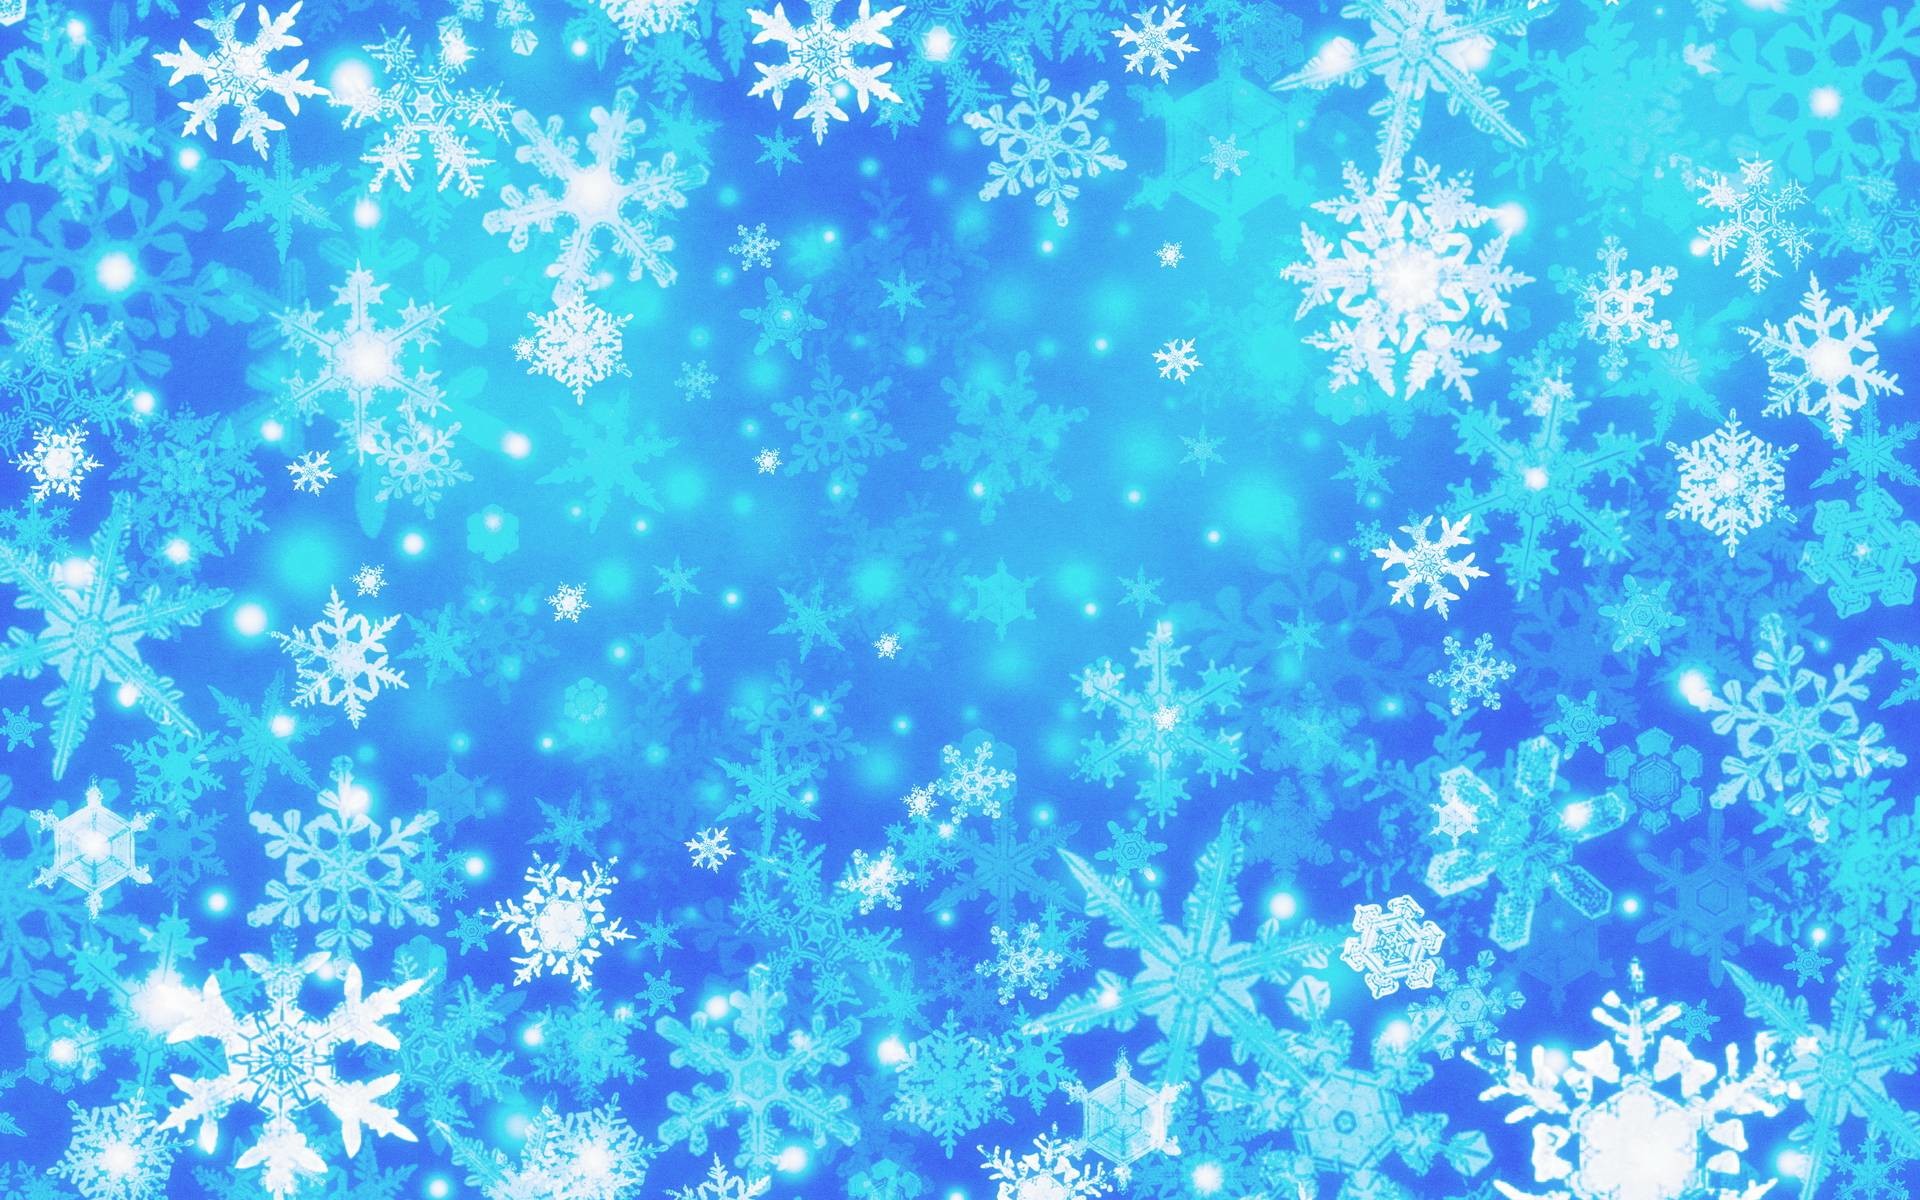 1920x1200 Free Download Snow Graphic Wallpaper in  resolutions.